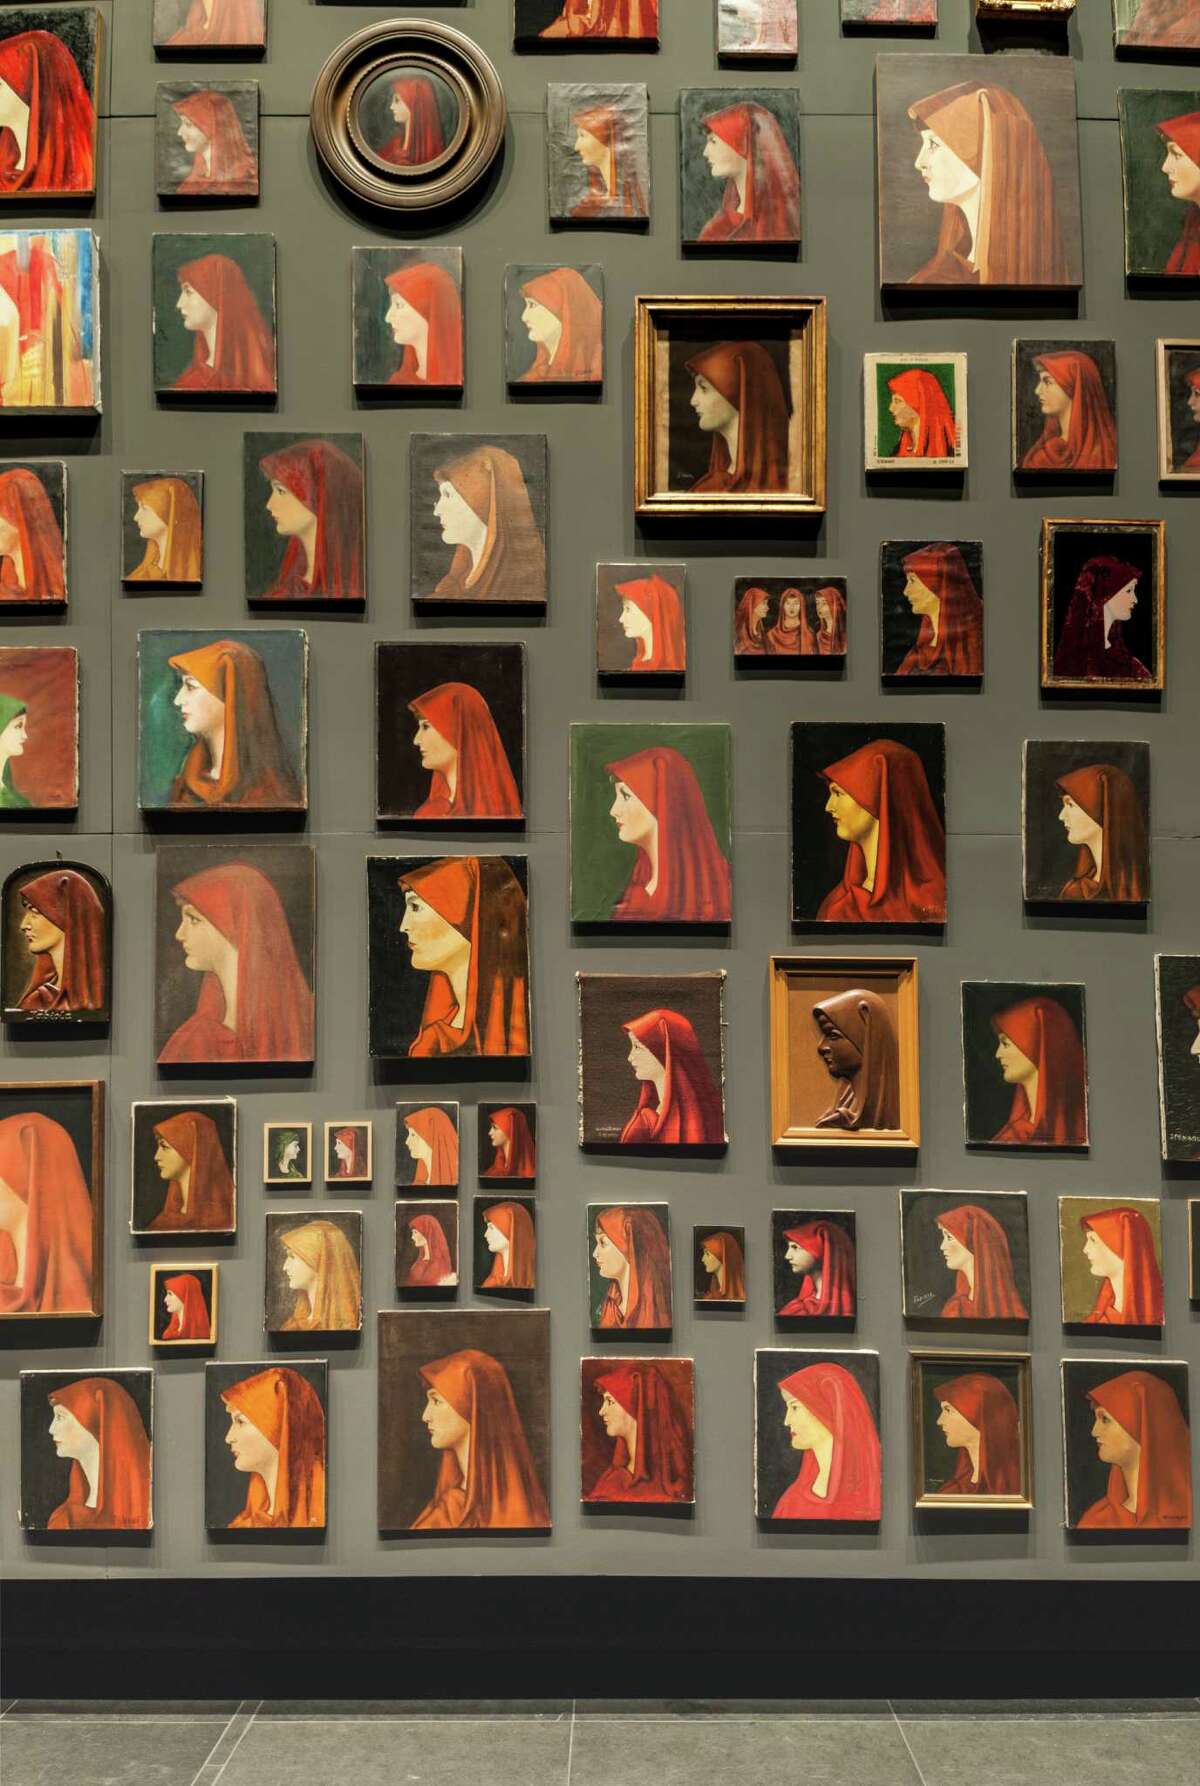 Francis Alys' "TheÂ FabiolaÂ Project" fills a purpose-built wall inside the Menil Collectoin's Byzantine Fresco Chapel with more than 400 "unique" copies of a lost painting by the little-known French artist Jean-Jacques Henner.